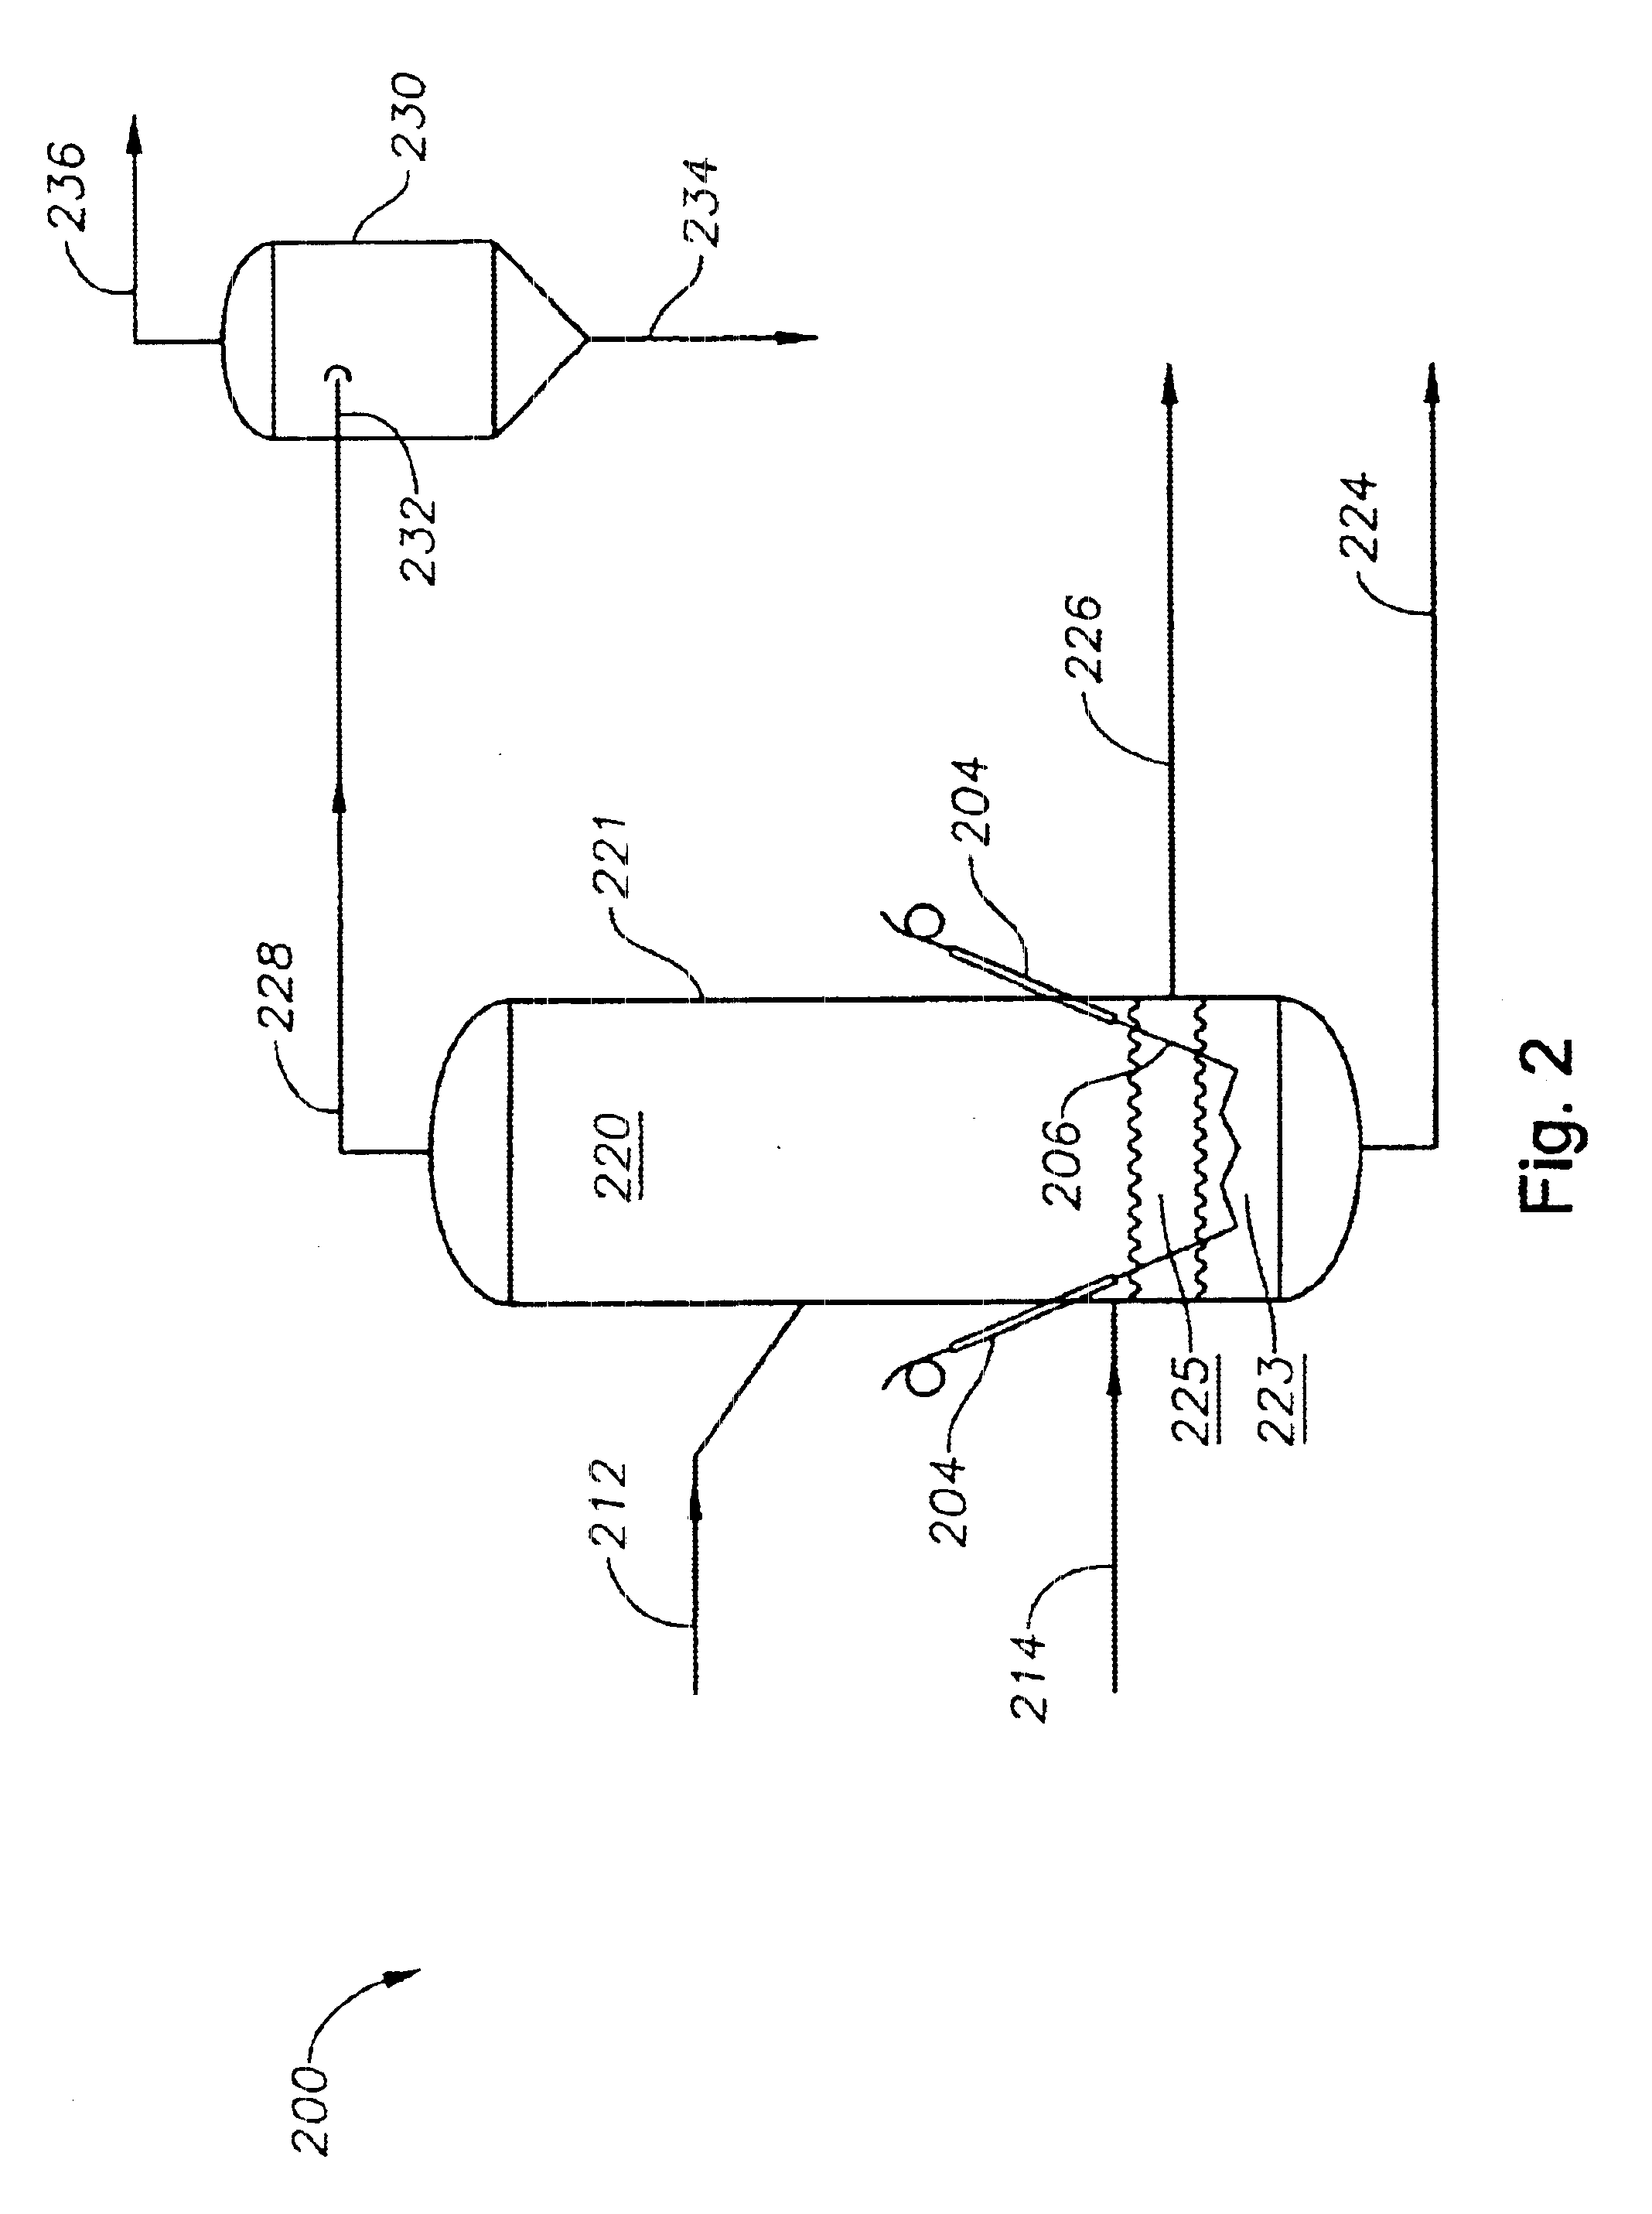 Method and apparatus for processing a waste product